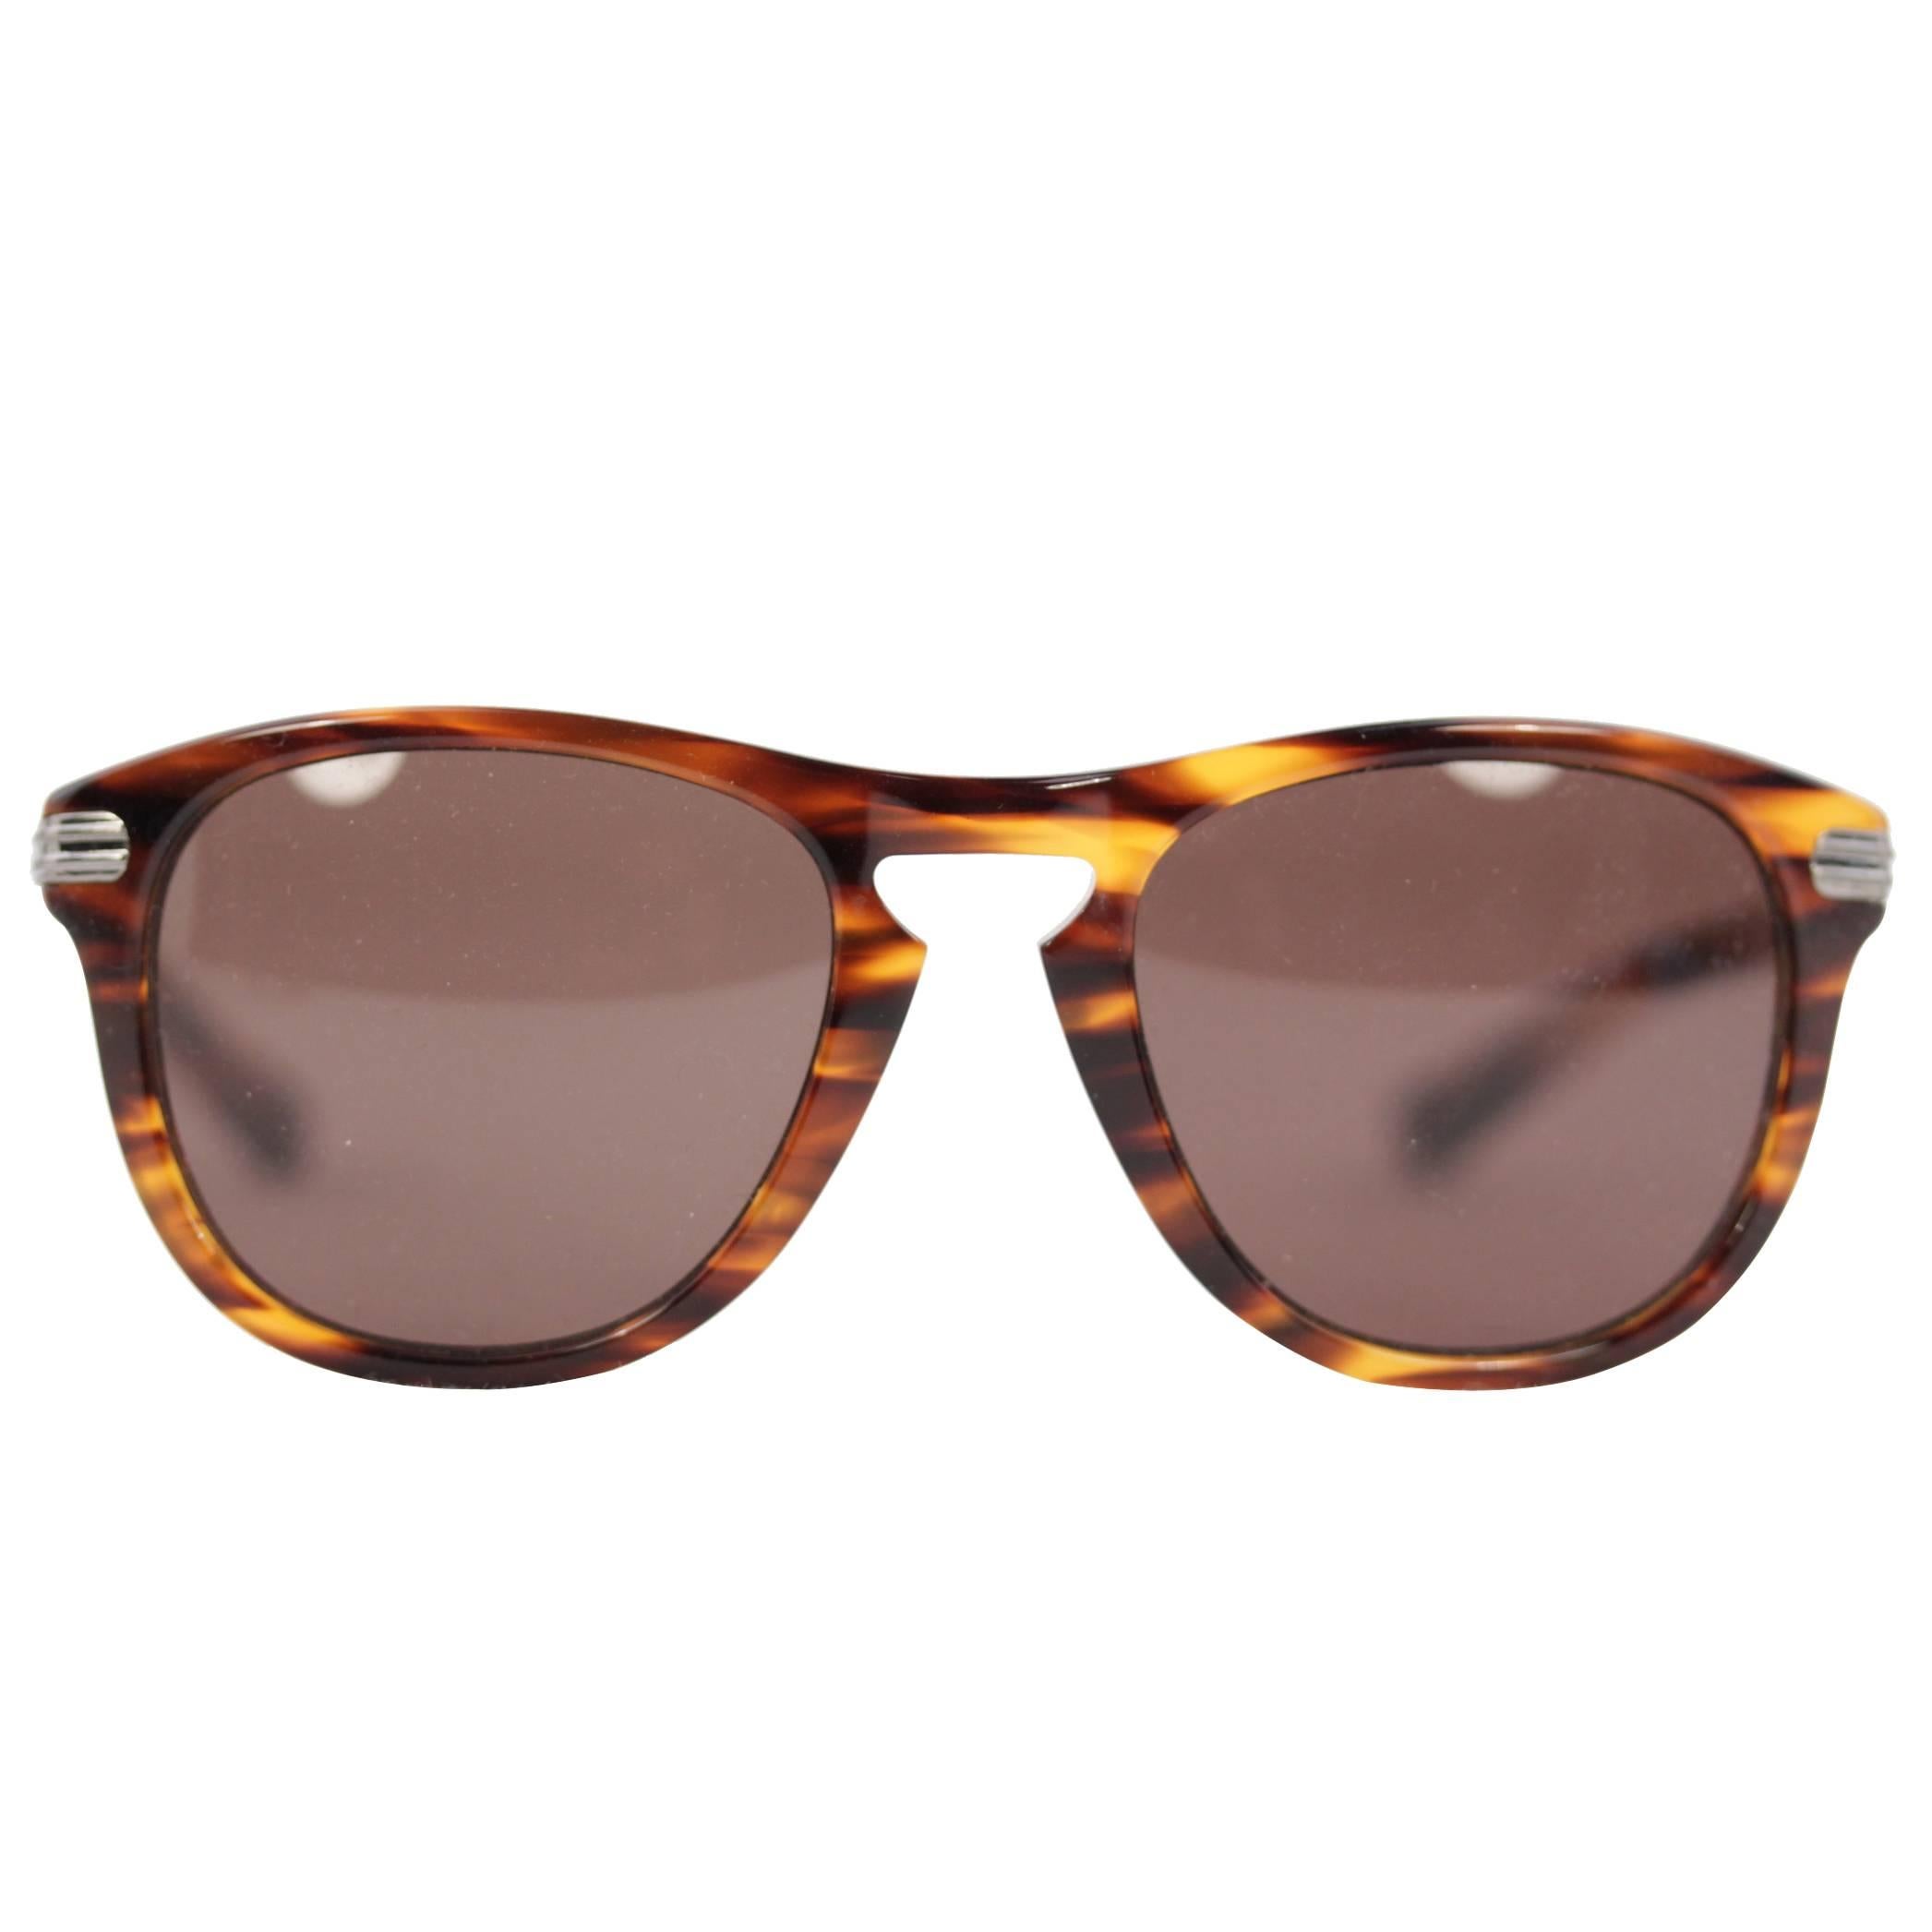 OLIVER PEOPLES Brown tortoise SUNGLASSES CANTON OV 5275SD 143371 56/22 140 3N